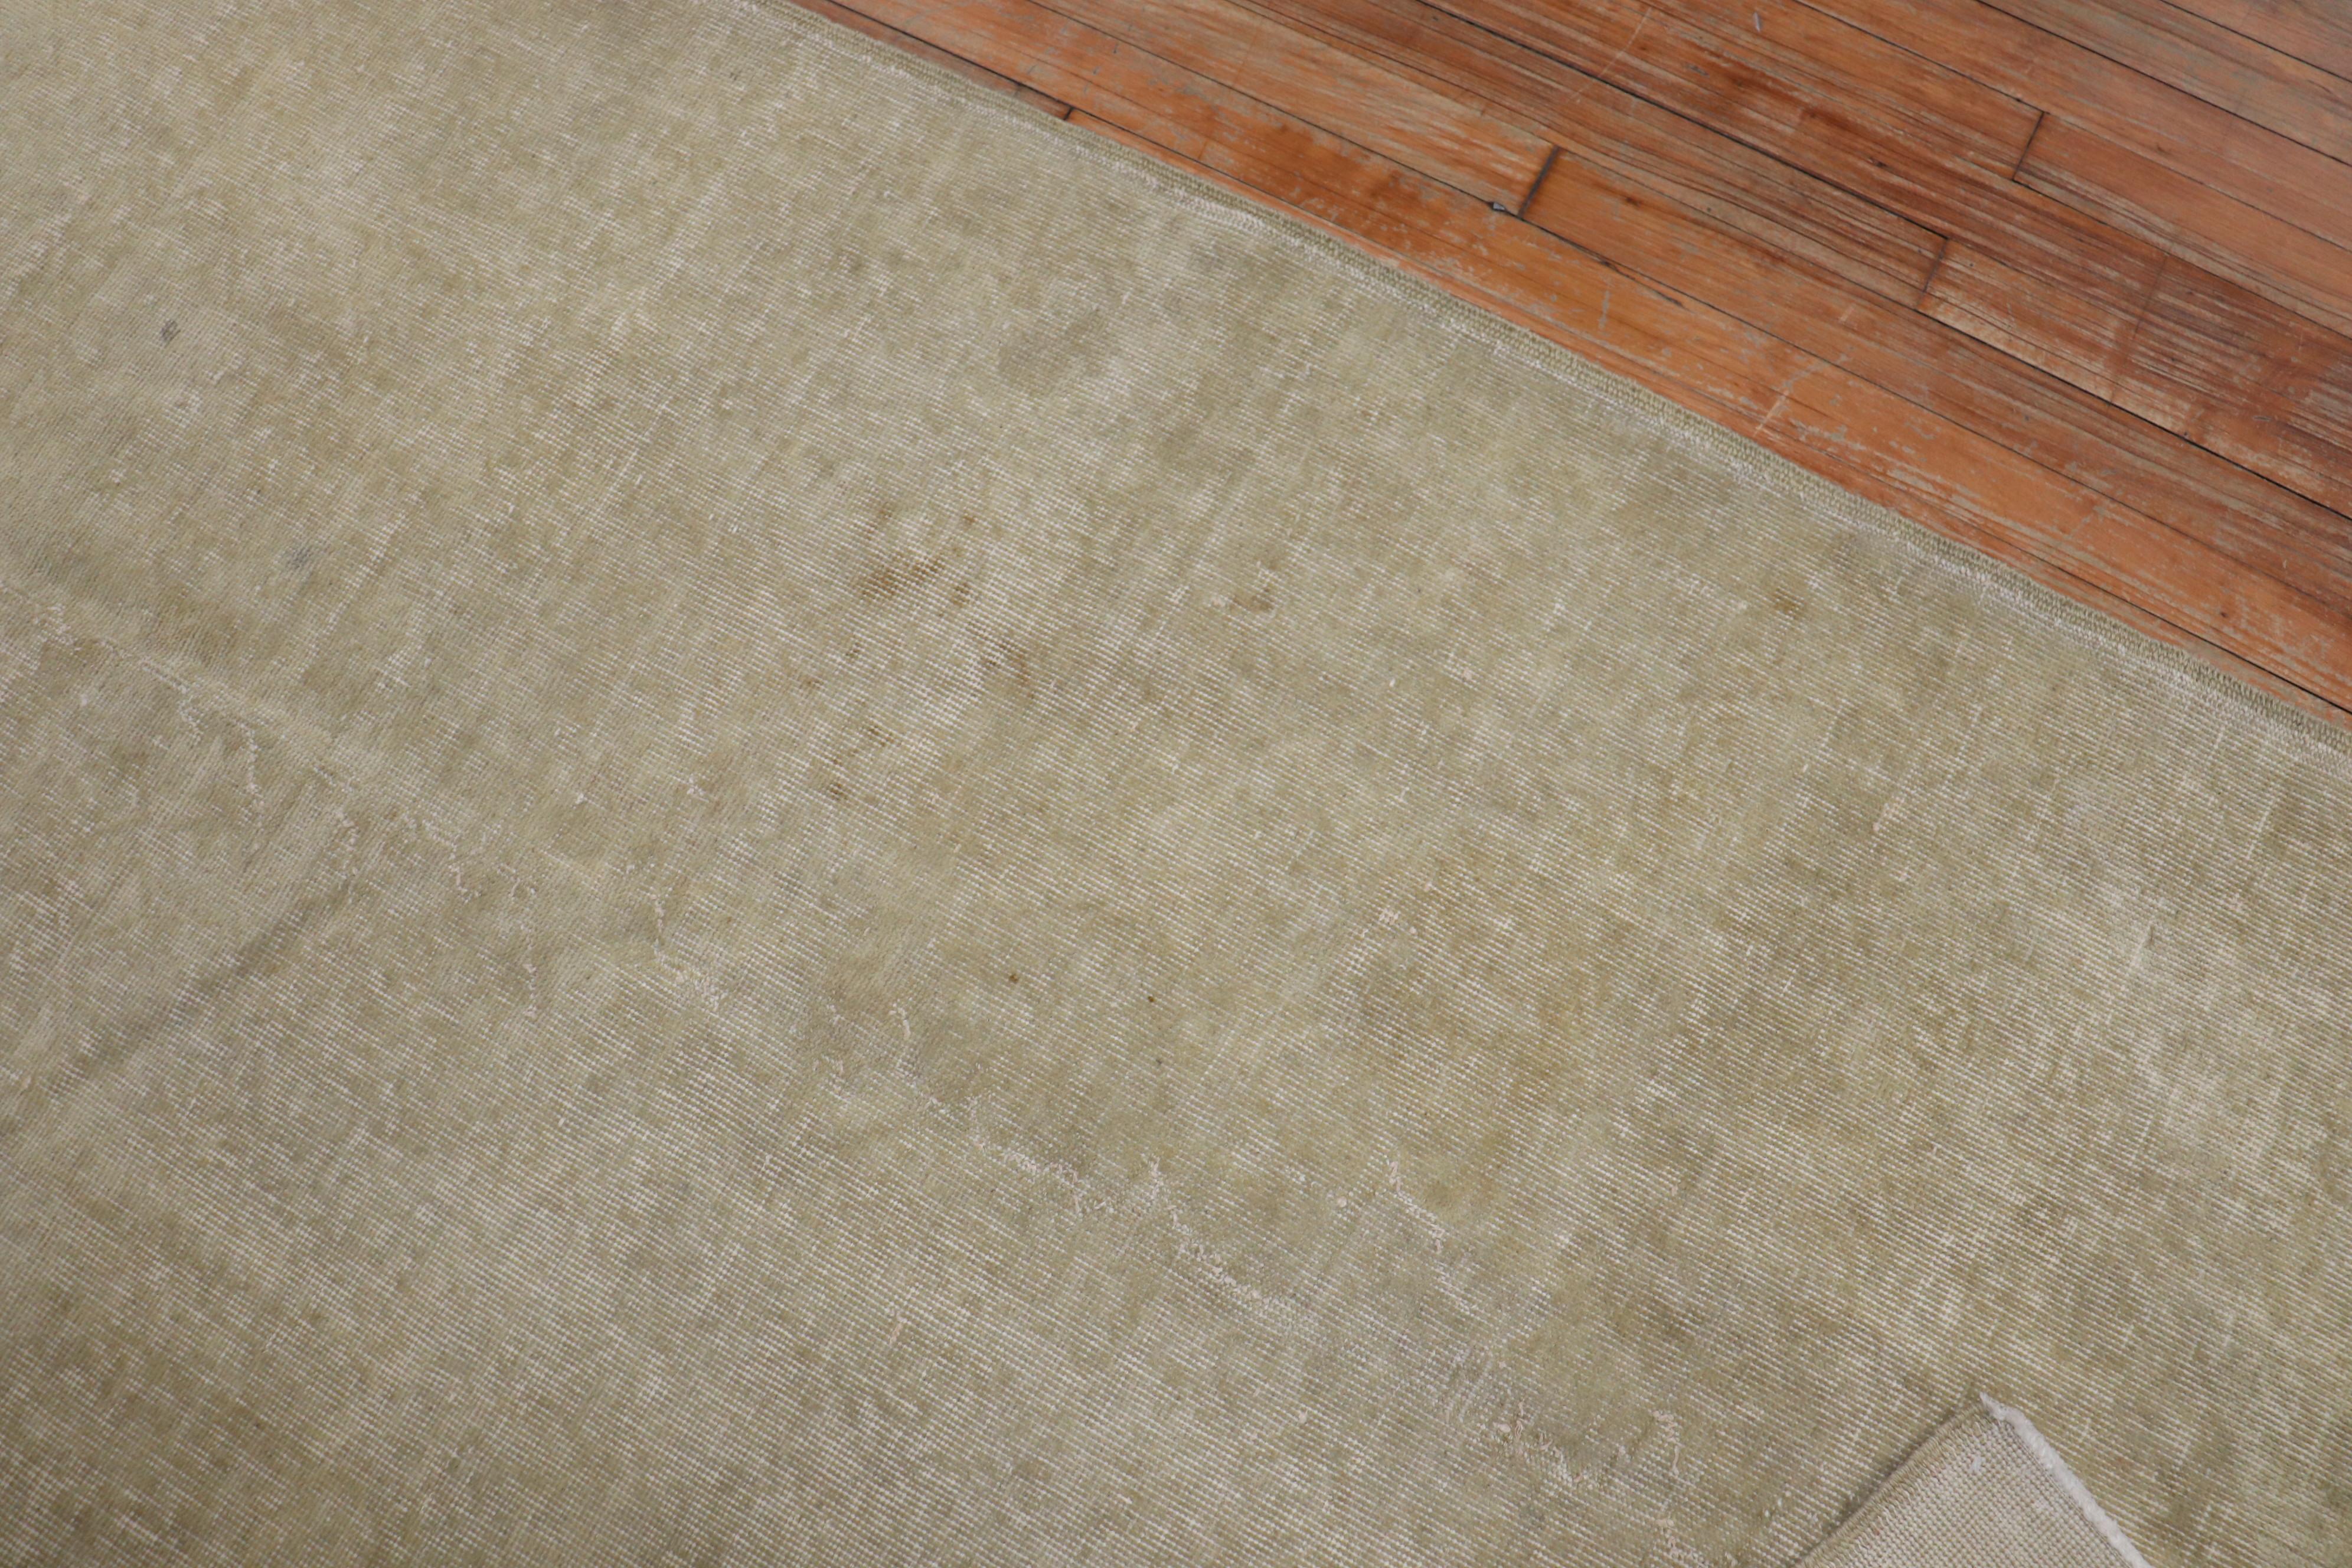 Monochromatic Neutral Worn Turkish Rug In Fair Condition For Sale In New York, NY